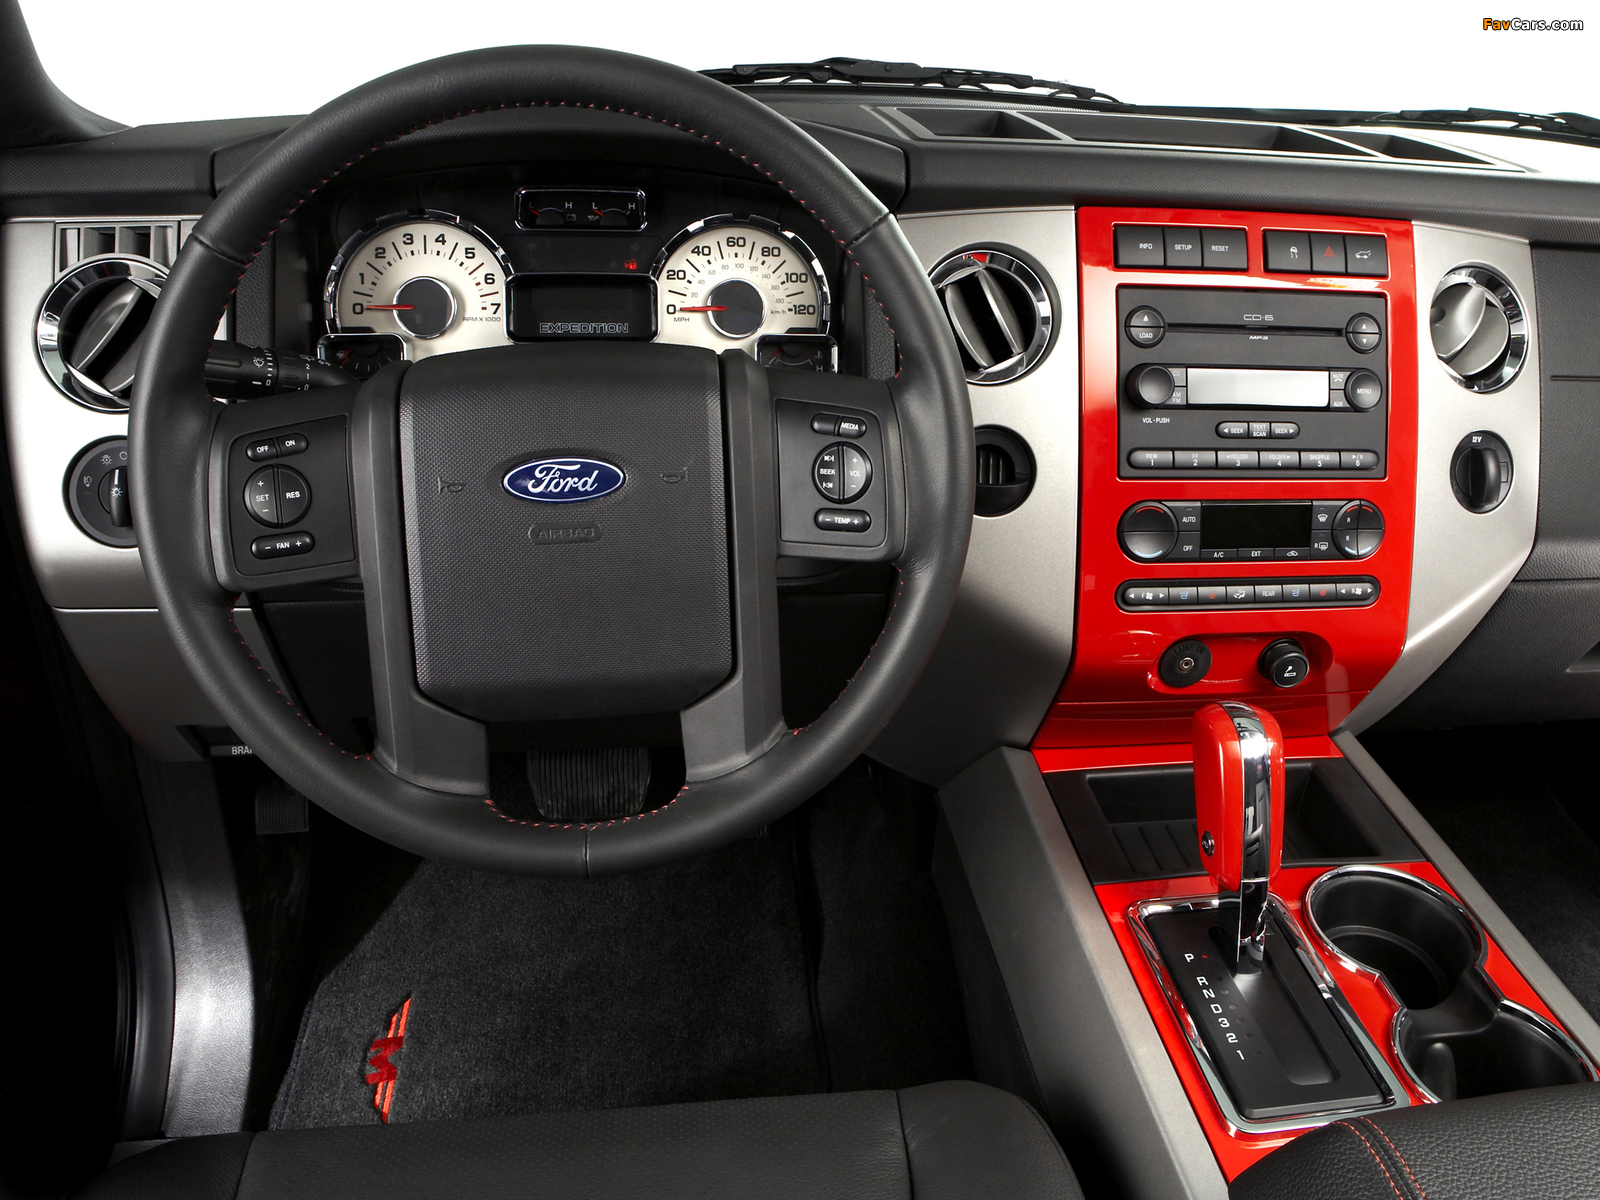 Ford Expedition Funkmaster Flex (U324) 2008 pictures (1600 x 1200)